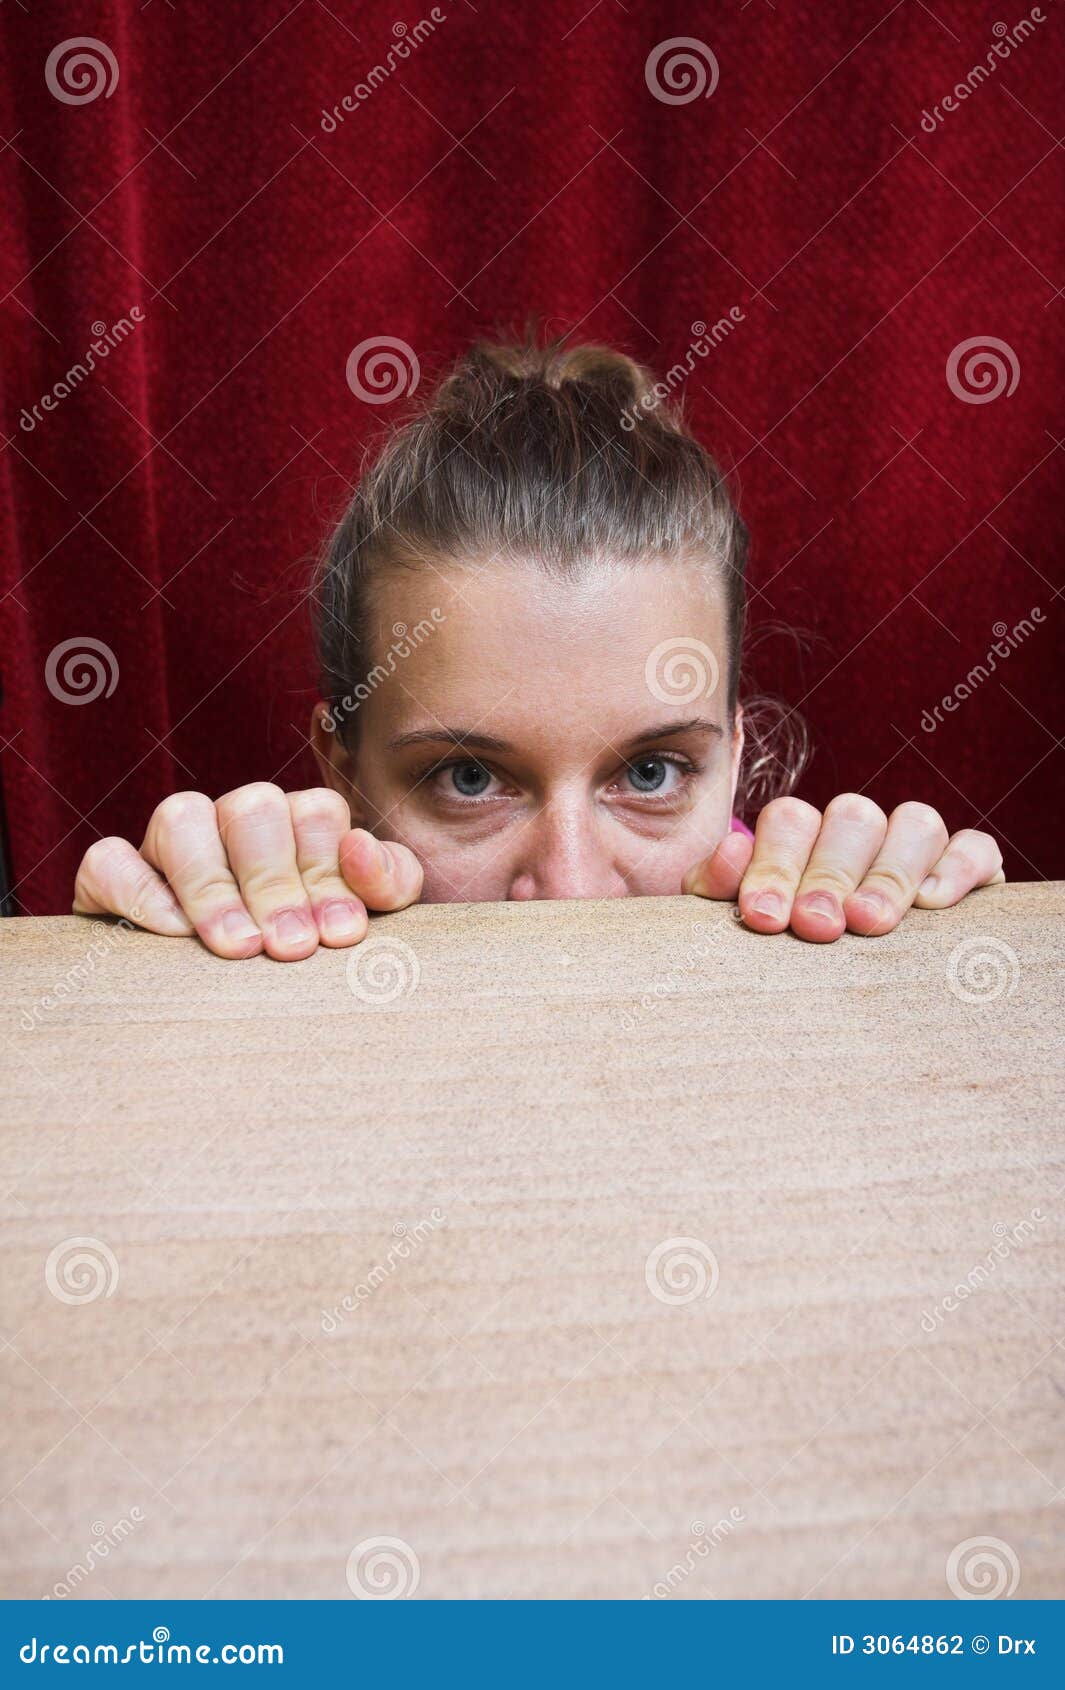 122,960 Scared Woman Face Images, Stock Photos, 3D objects